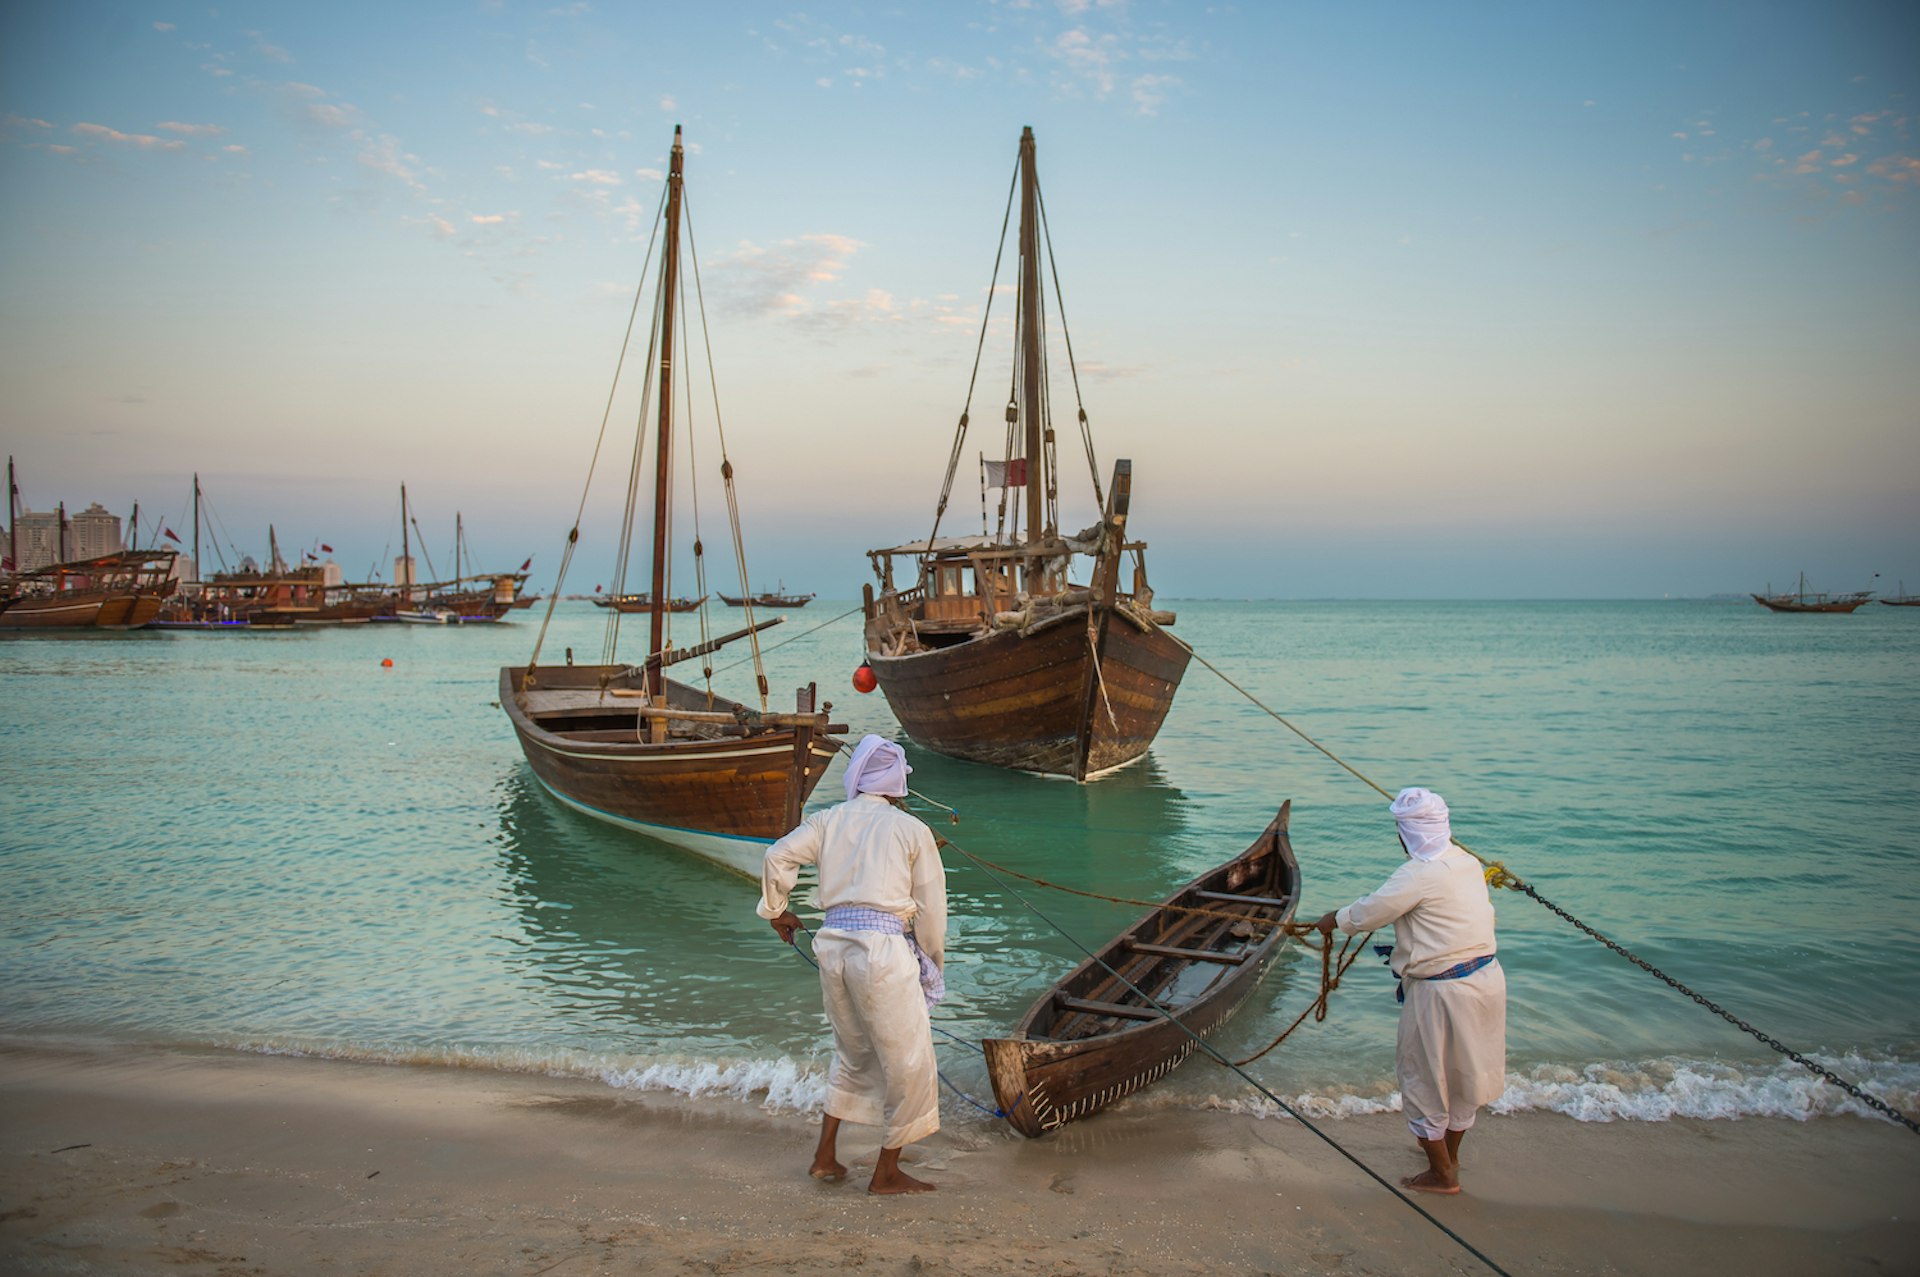 Sailors pull in a traditional dhow boats at the Katara Traditional Dhow Festival, Doha, Qatar, Middle East